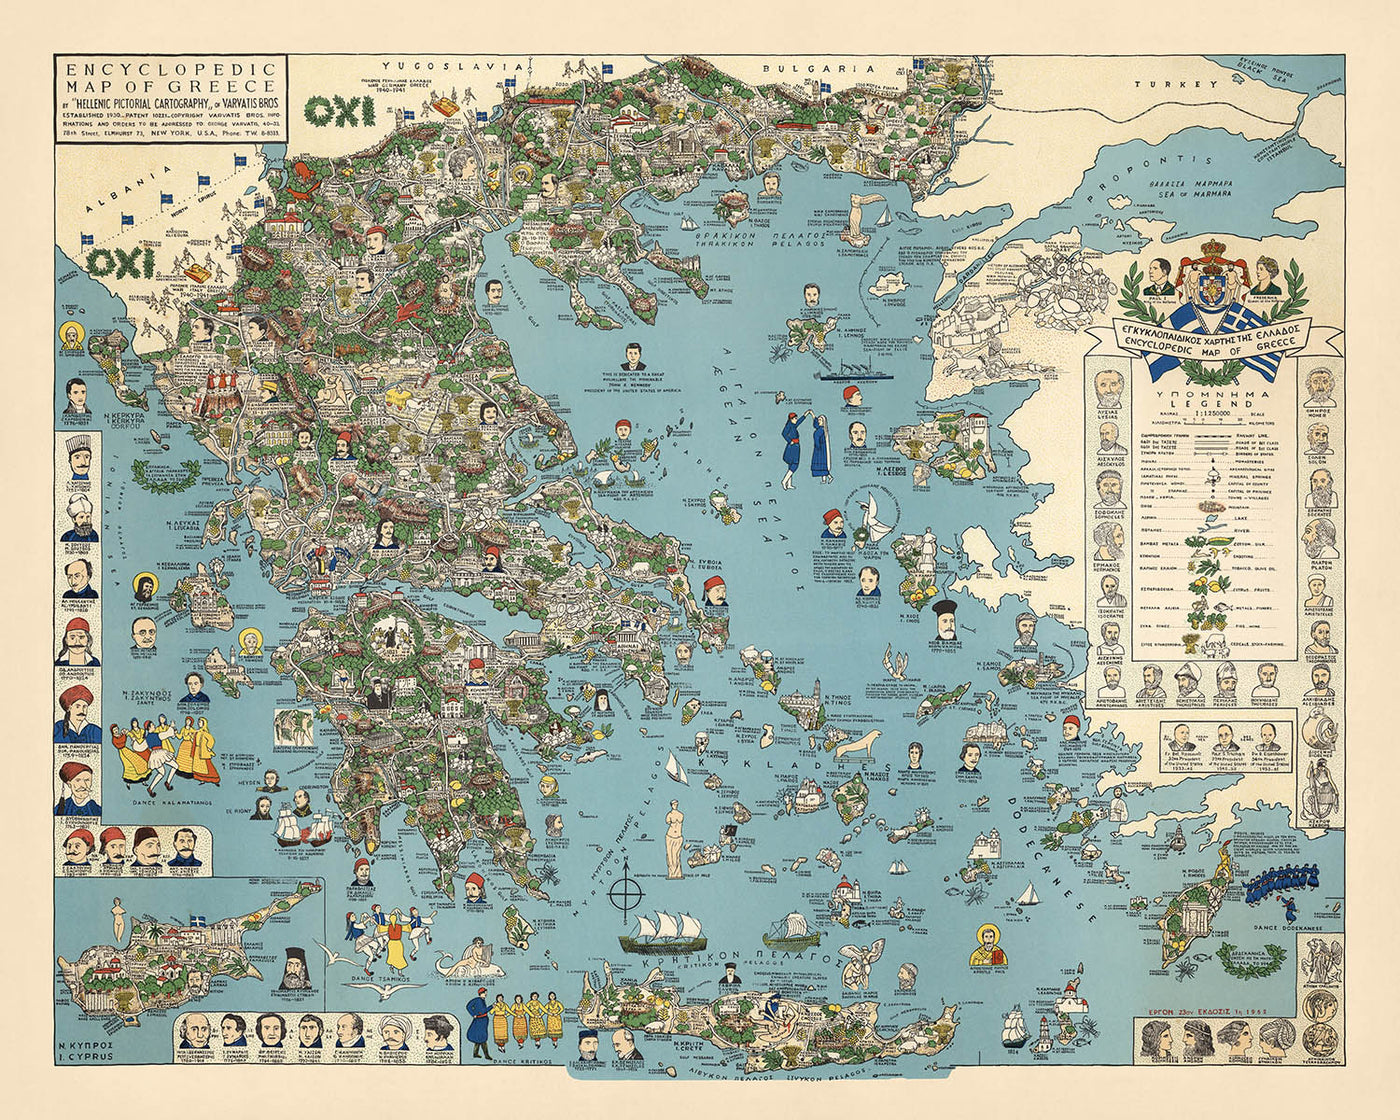 Old Pictorial Map of Ancient & Modern Greece, 1962: Athens, Thessaloniki, Mount Olympus, Greek Civil War